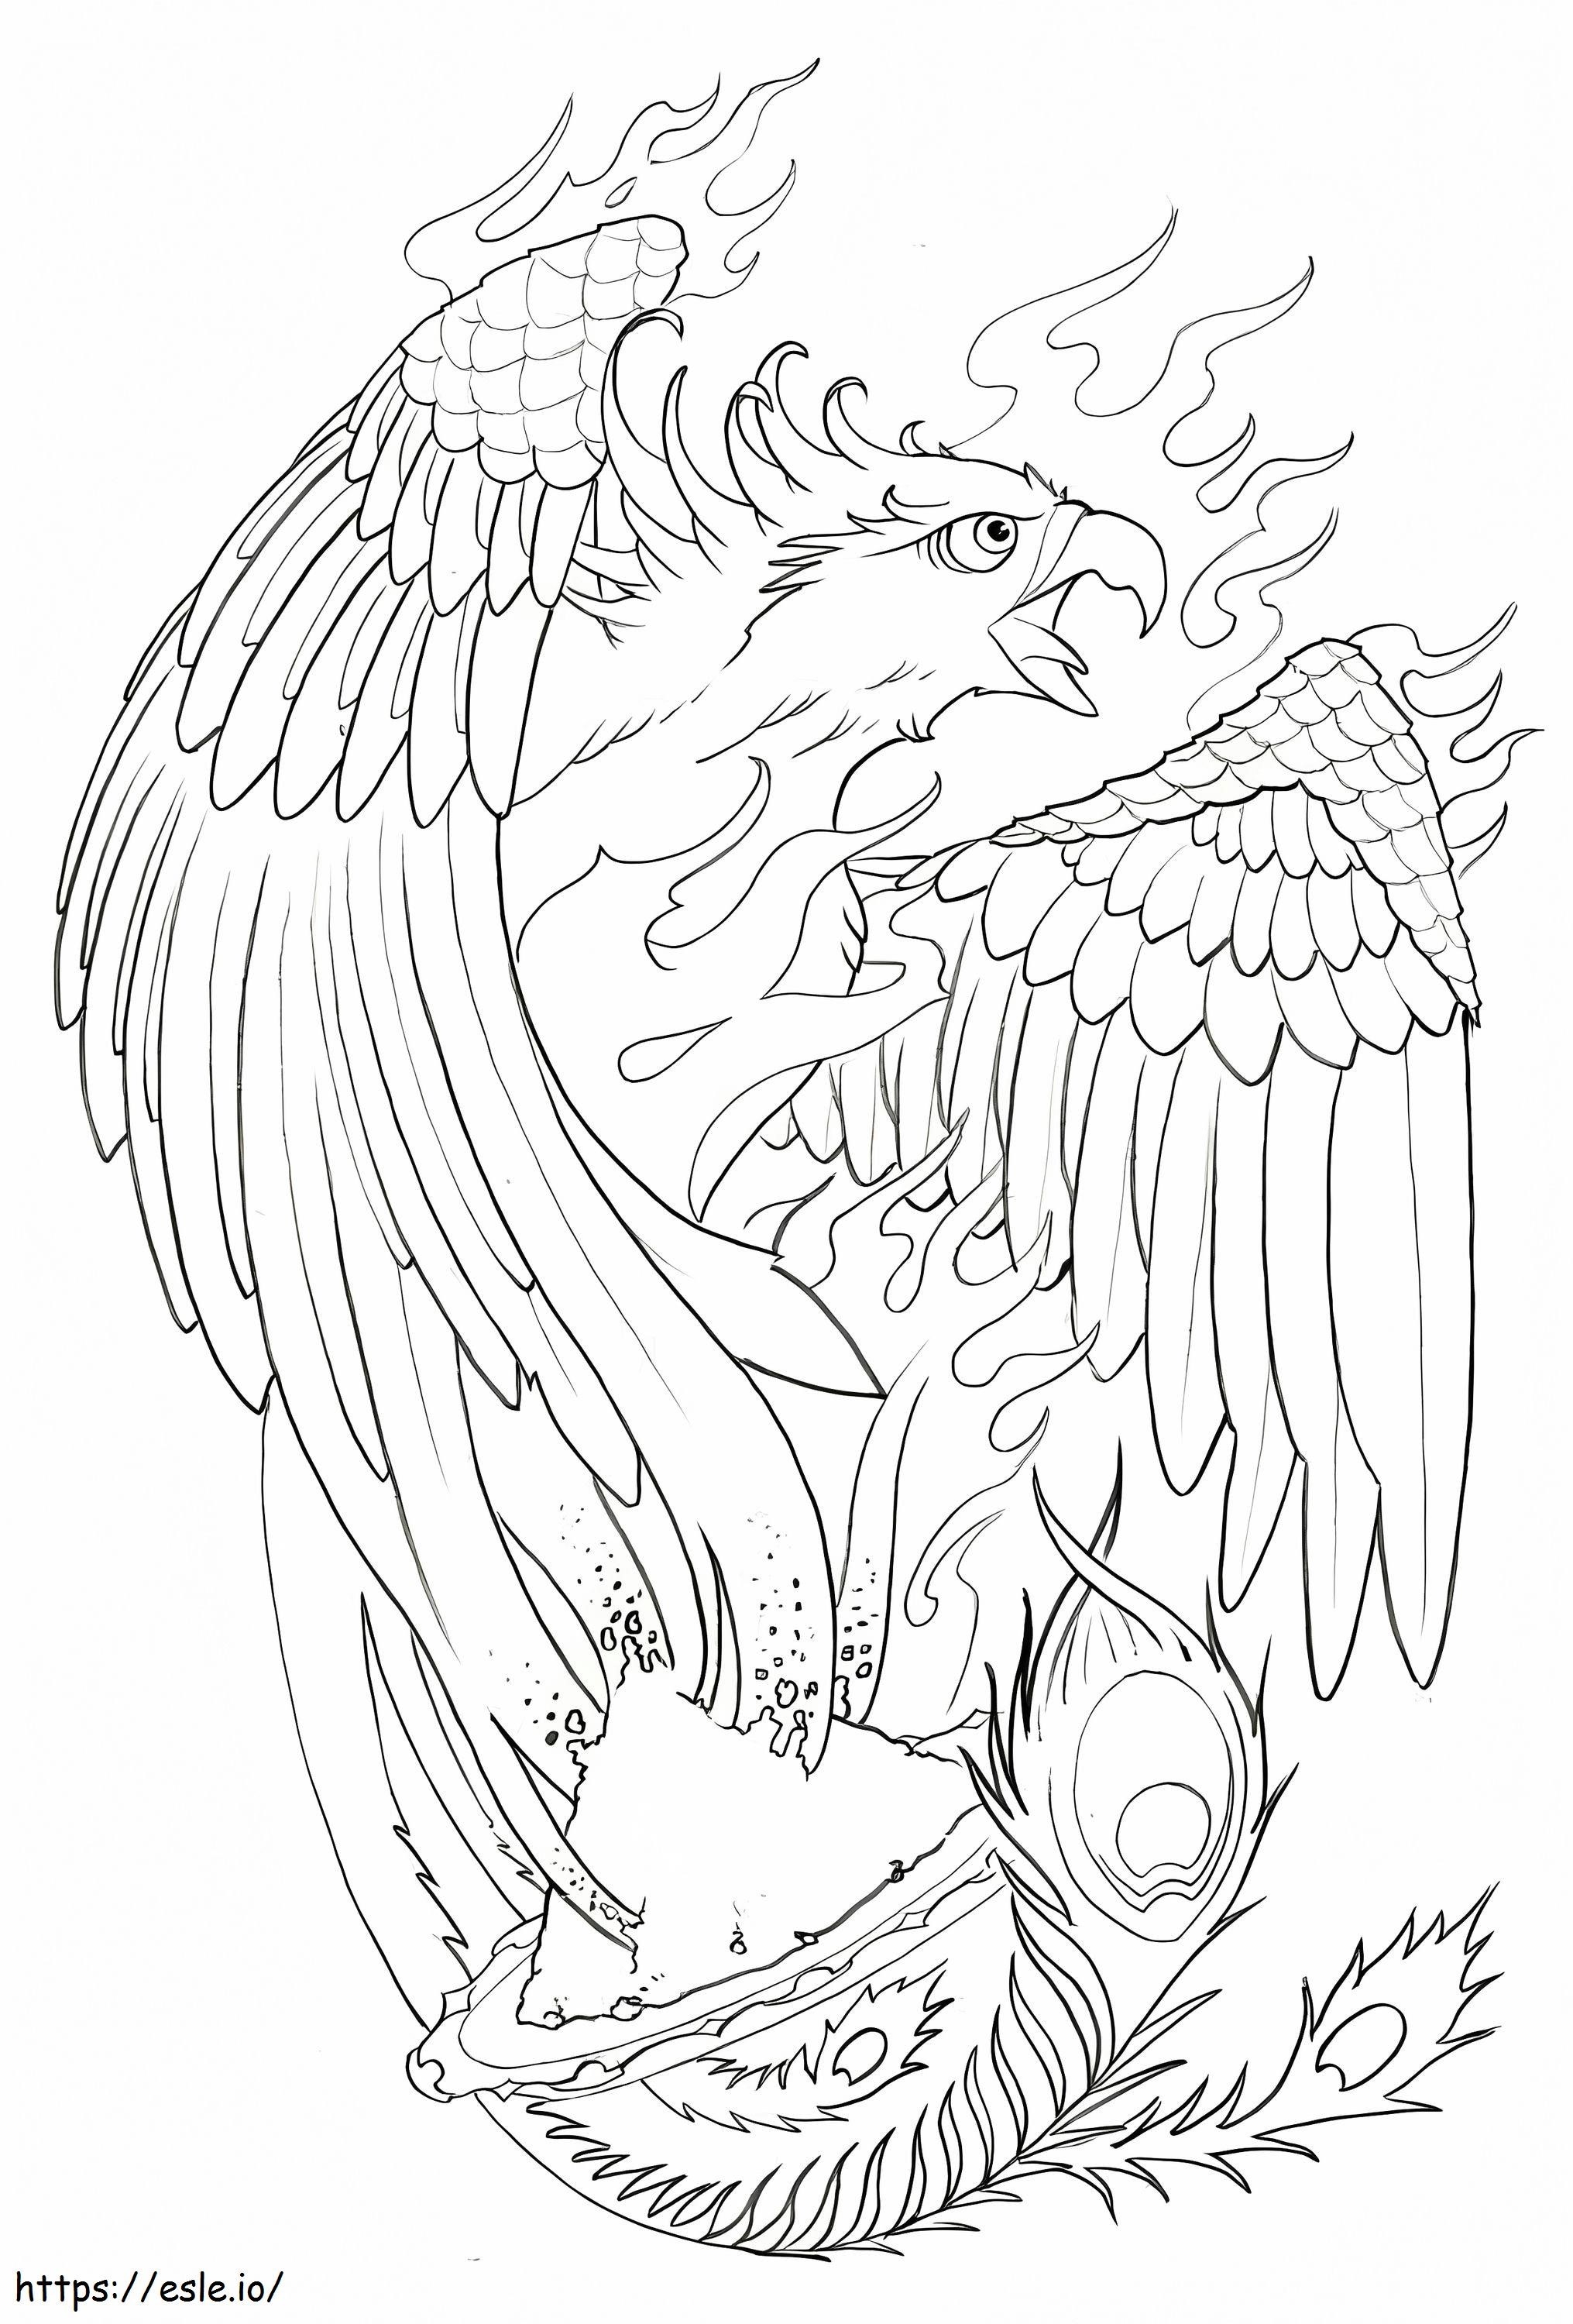 Awesome Phoenix coloring page